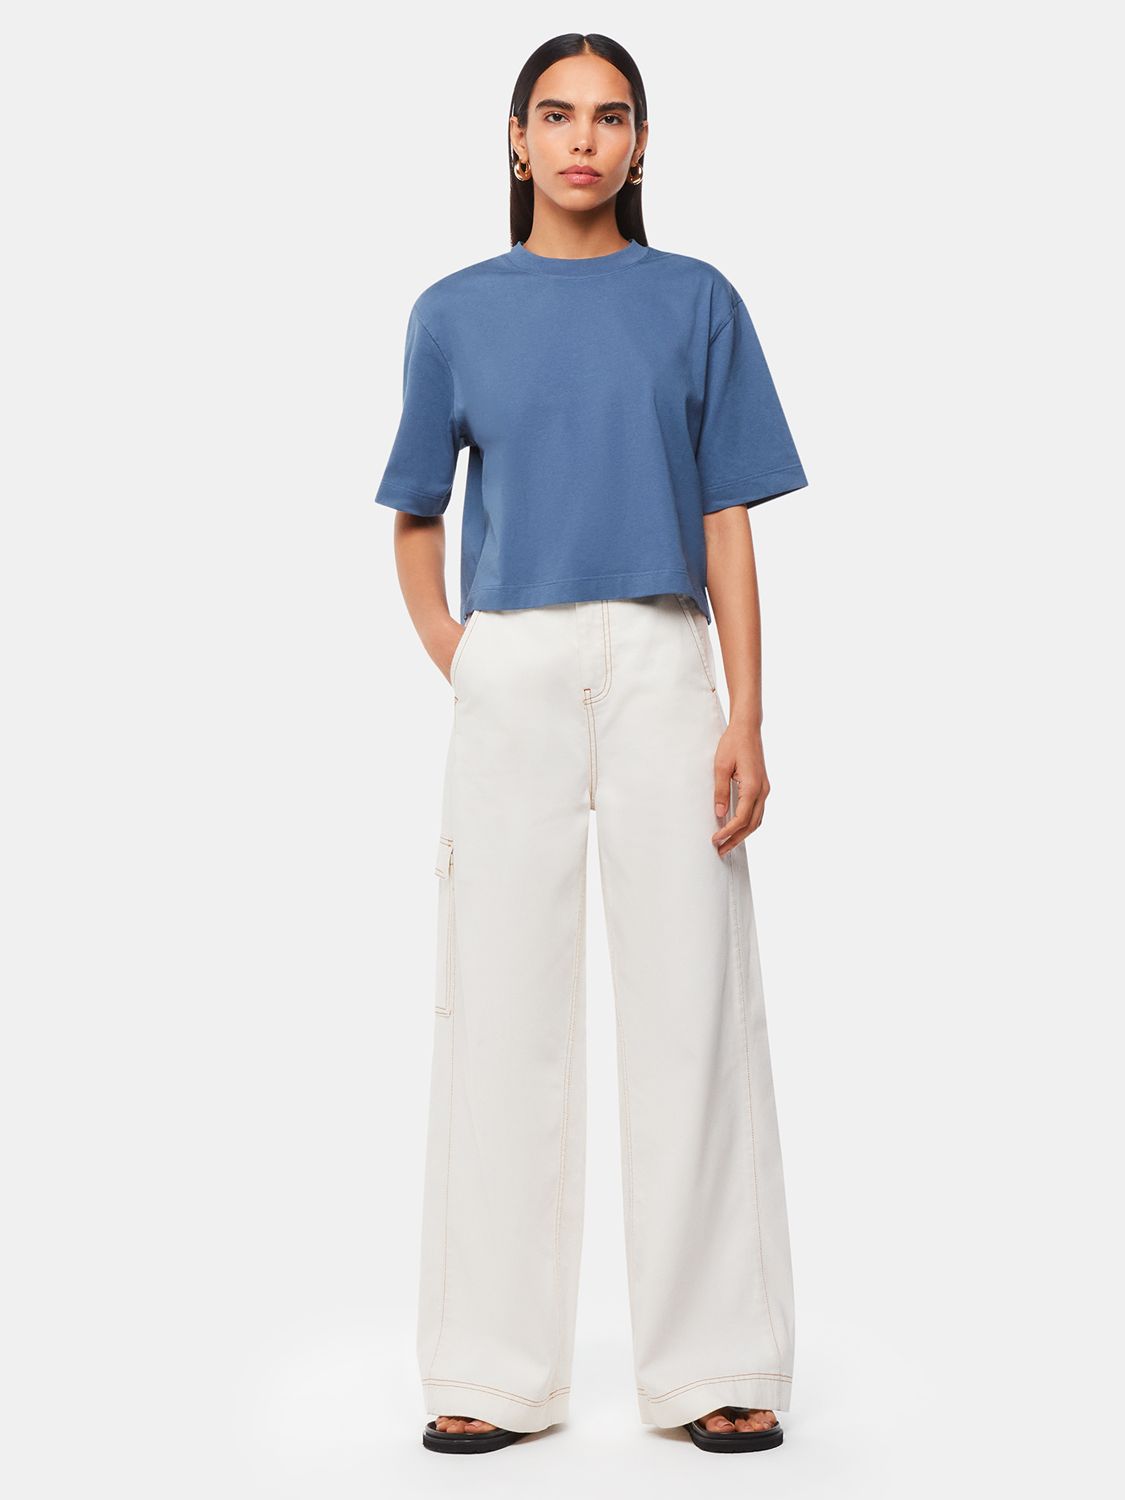 Whistles Cropped Relaxed T-Shirt, Blue, XS